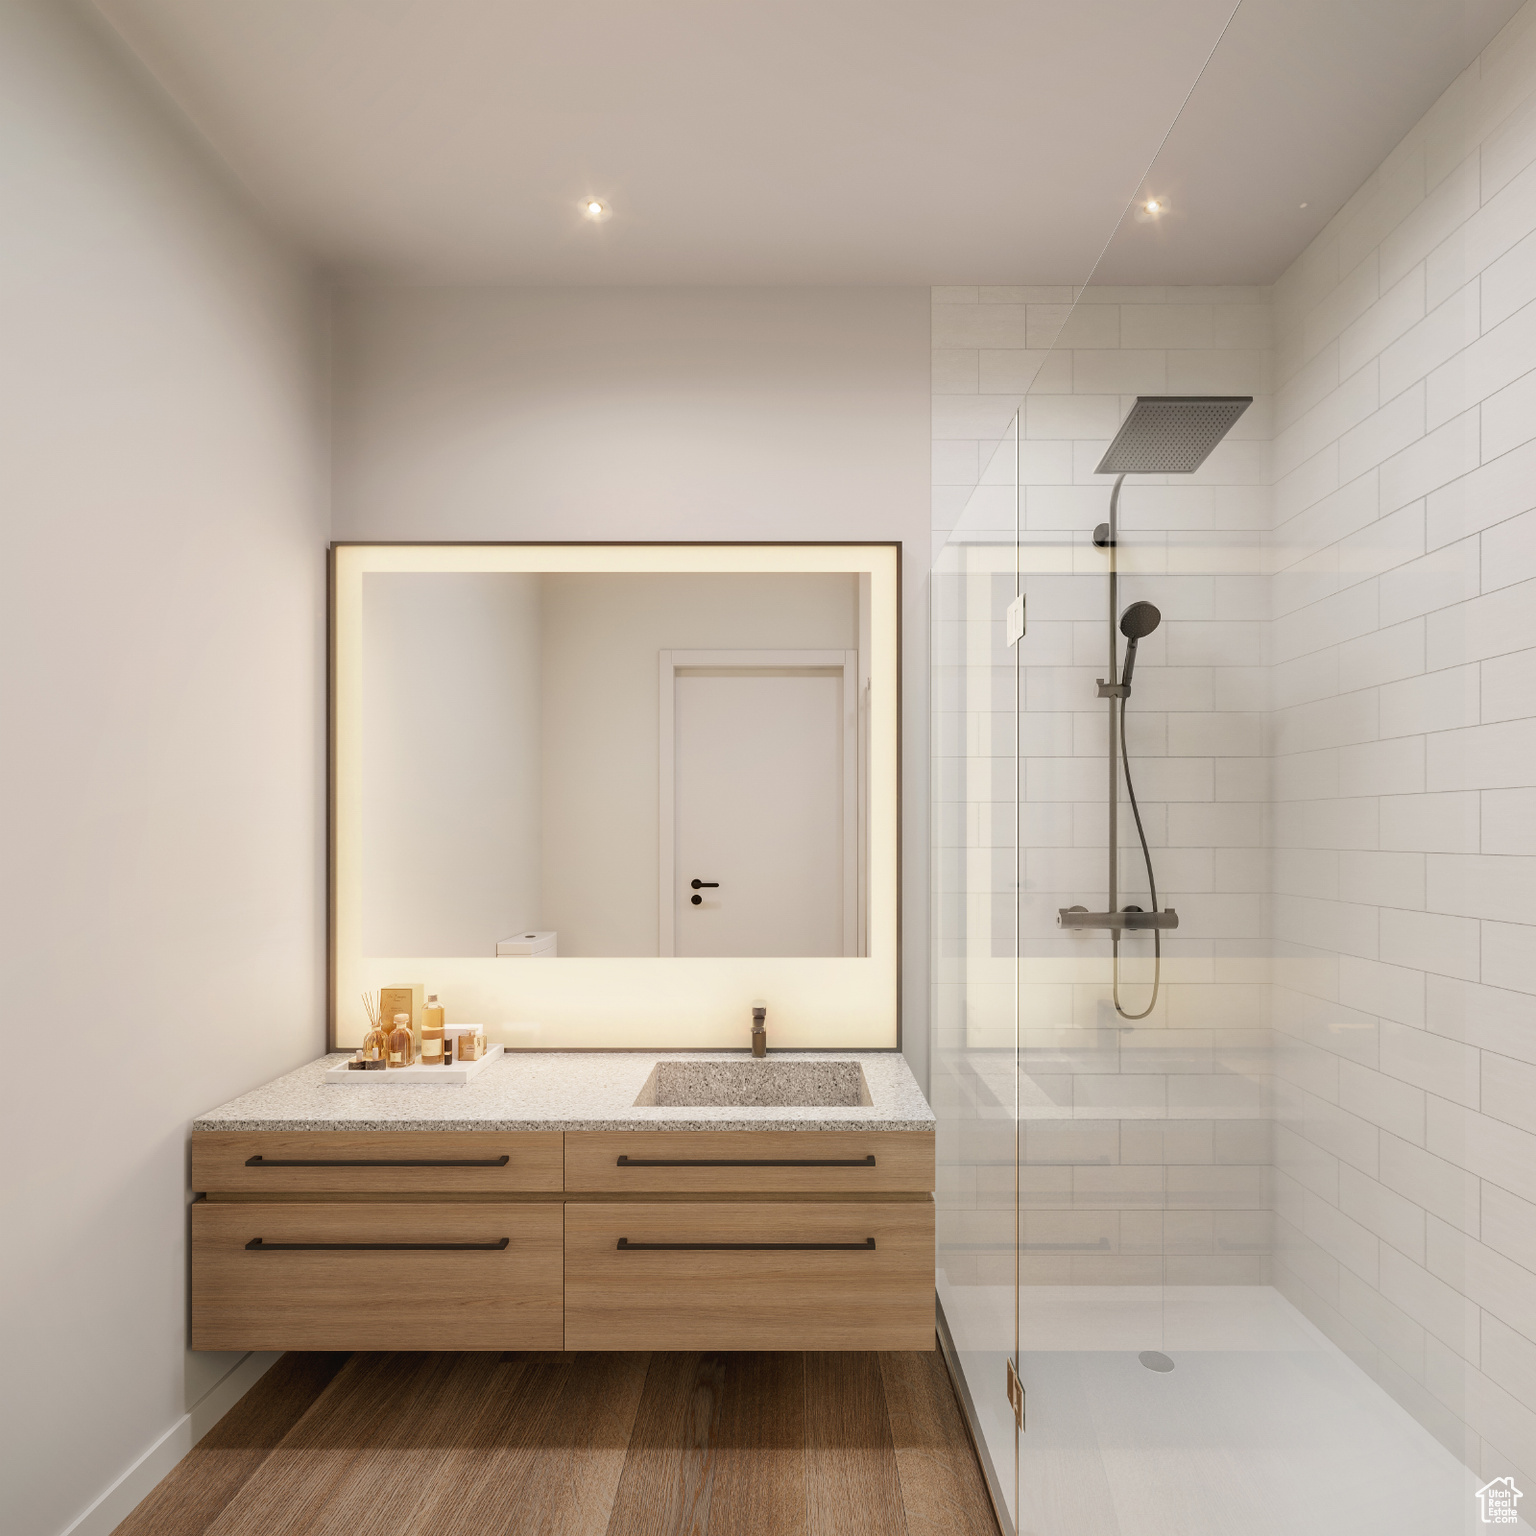 Bathroom with vanity, hardwood / wood-style floors, and a shower with door